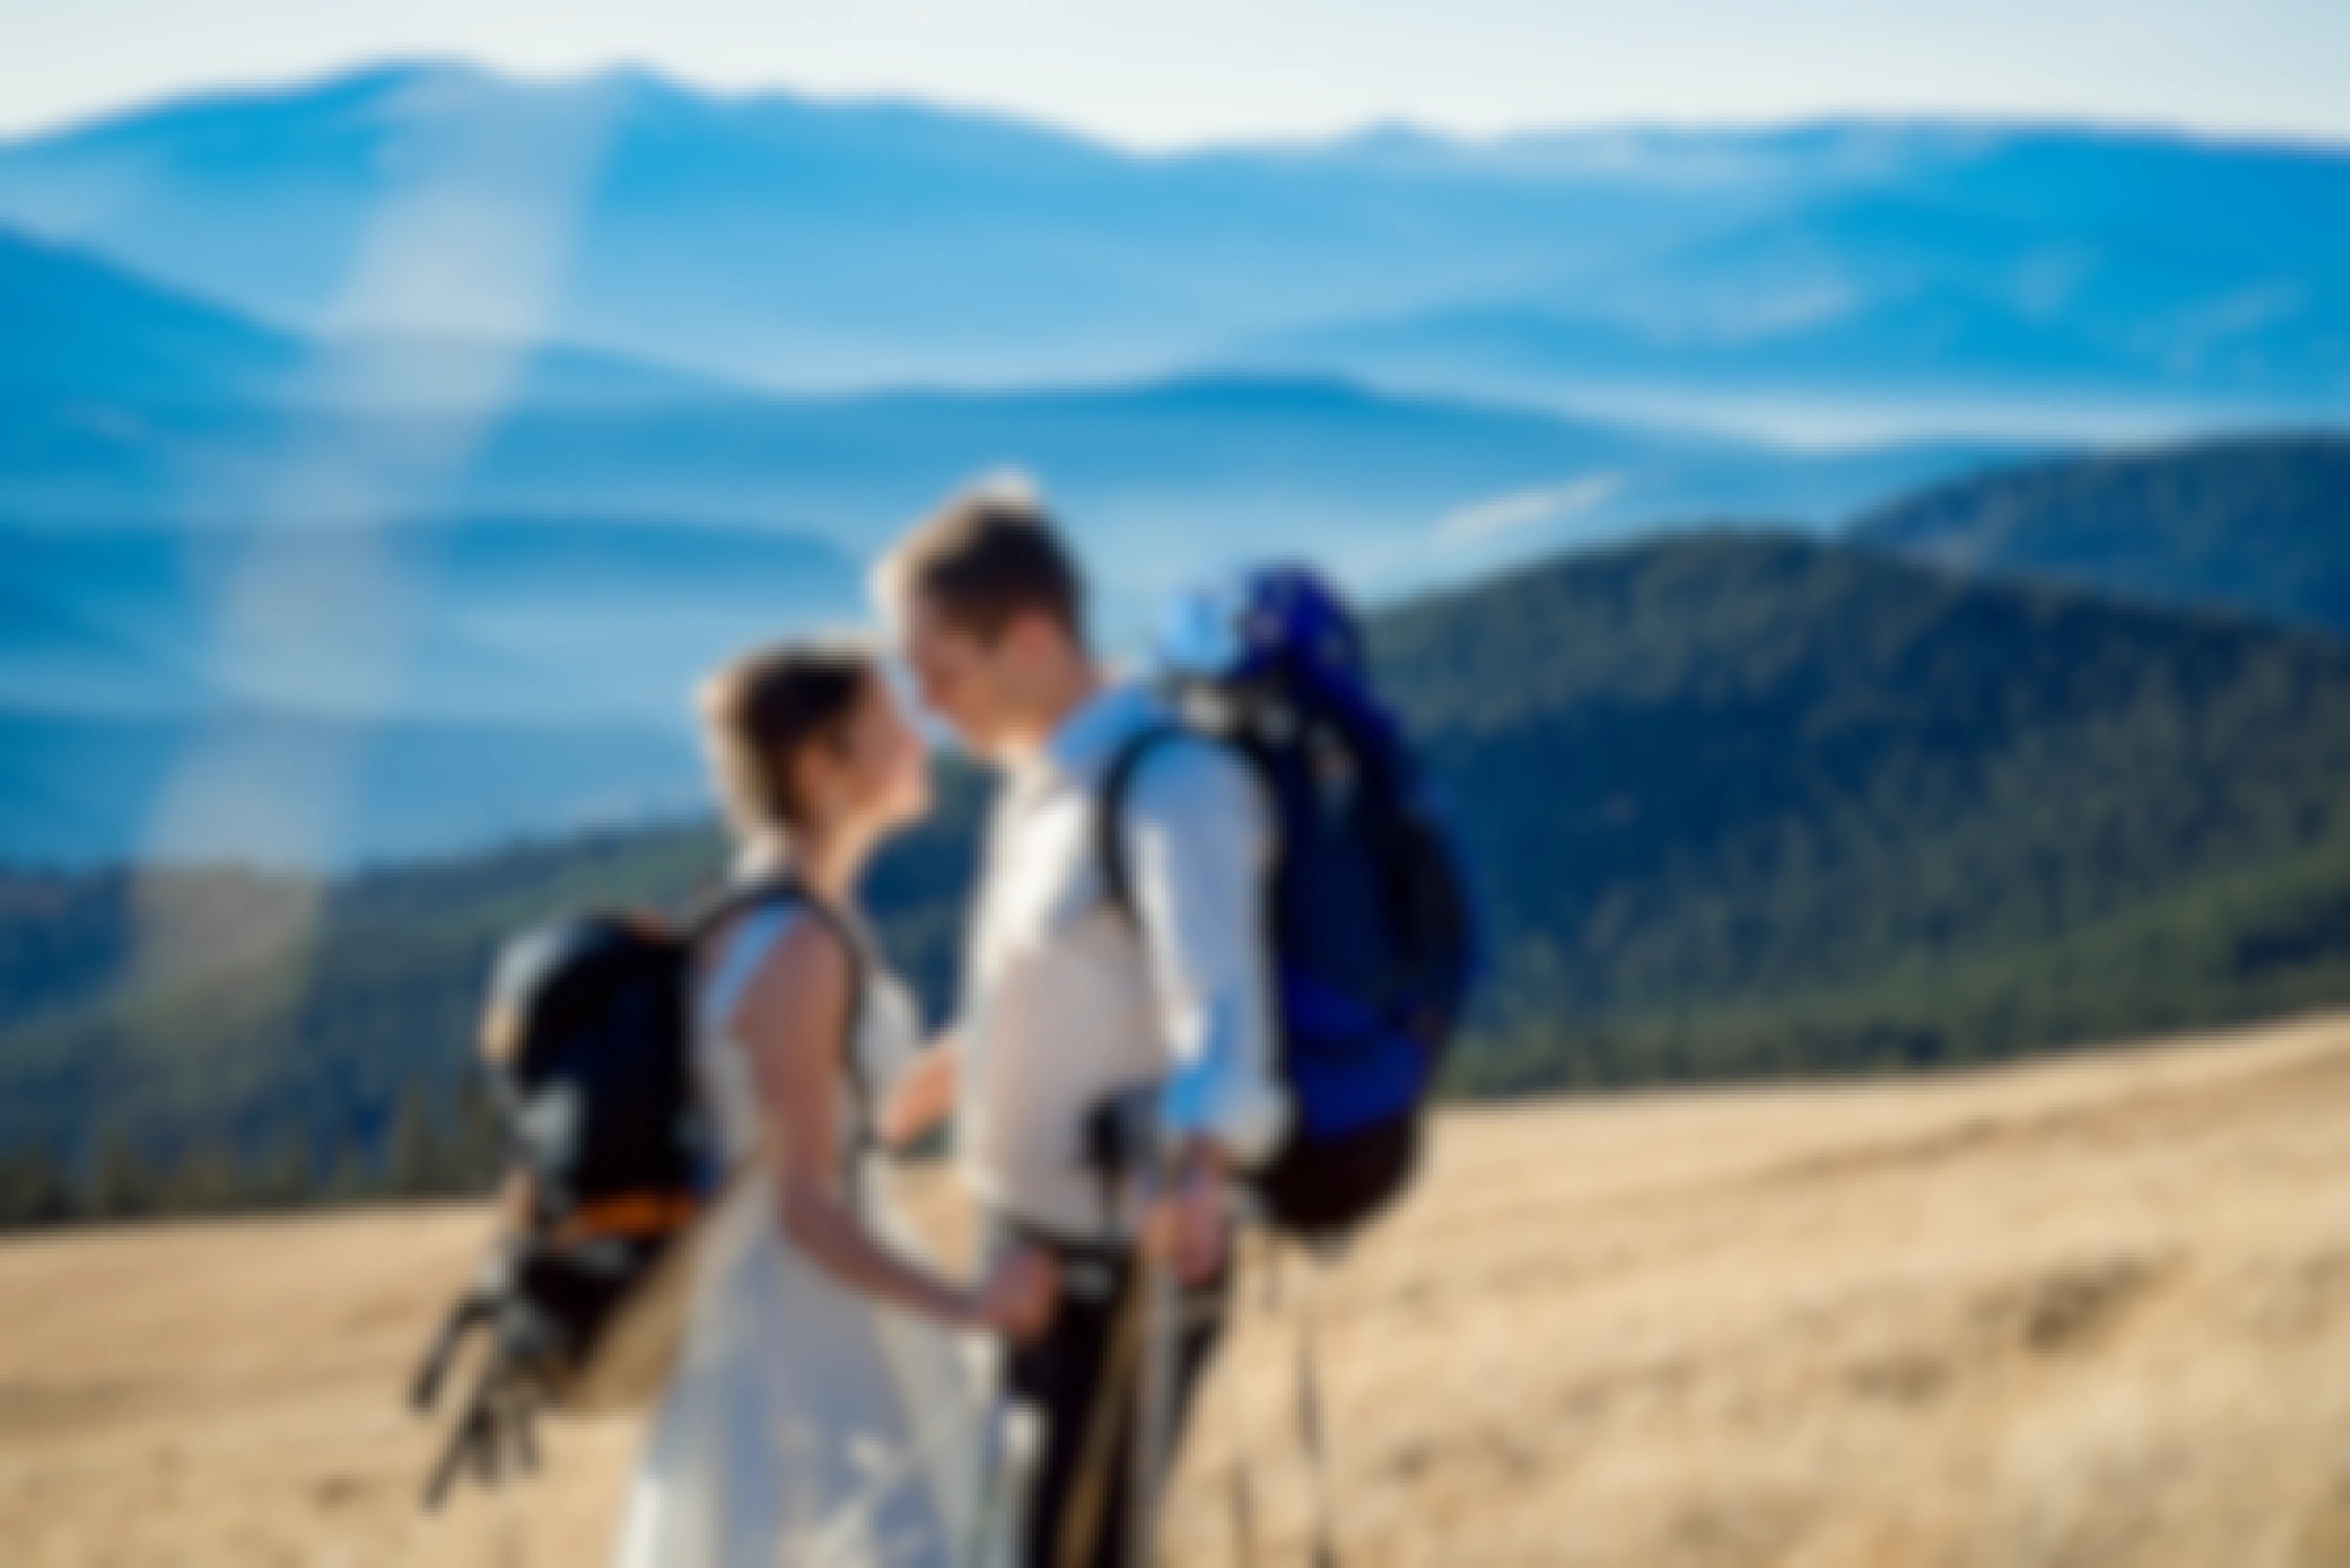 A man and woman standing on a mountain side with mountains in the distance behind them. The woman is dressed in a wedding gown and the man is wearing slacks and a dress shirt. Both are wearing hiking backpacks and carrying hiking polls.